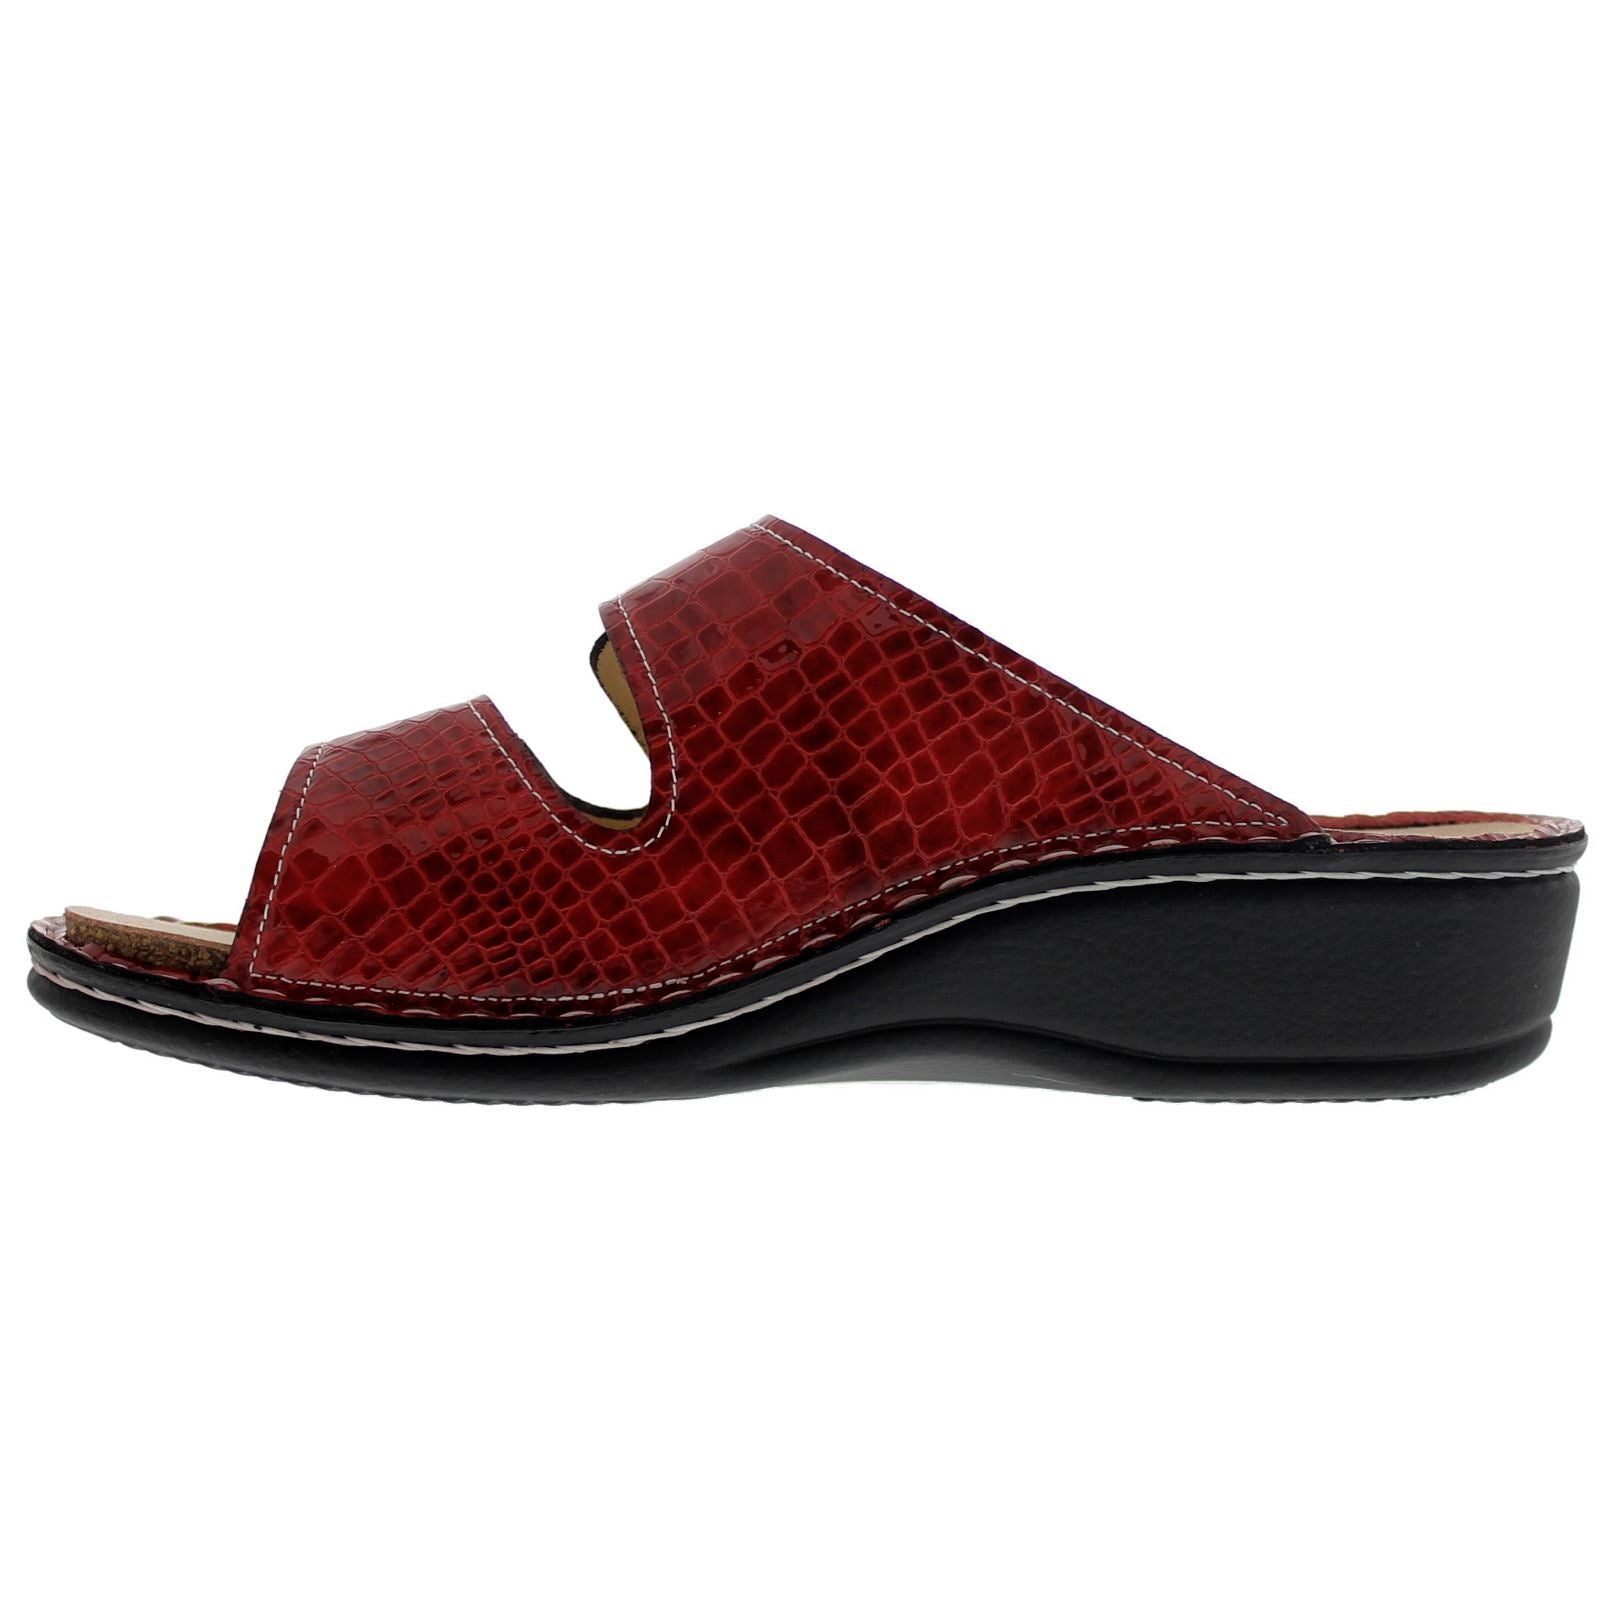 Finn Comfort Jamaica Leather Women's Slip-On Sandals#color_red patent